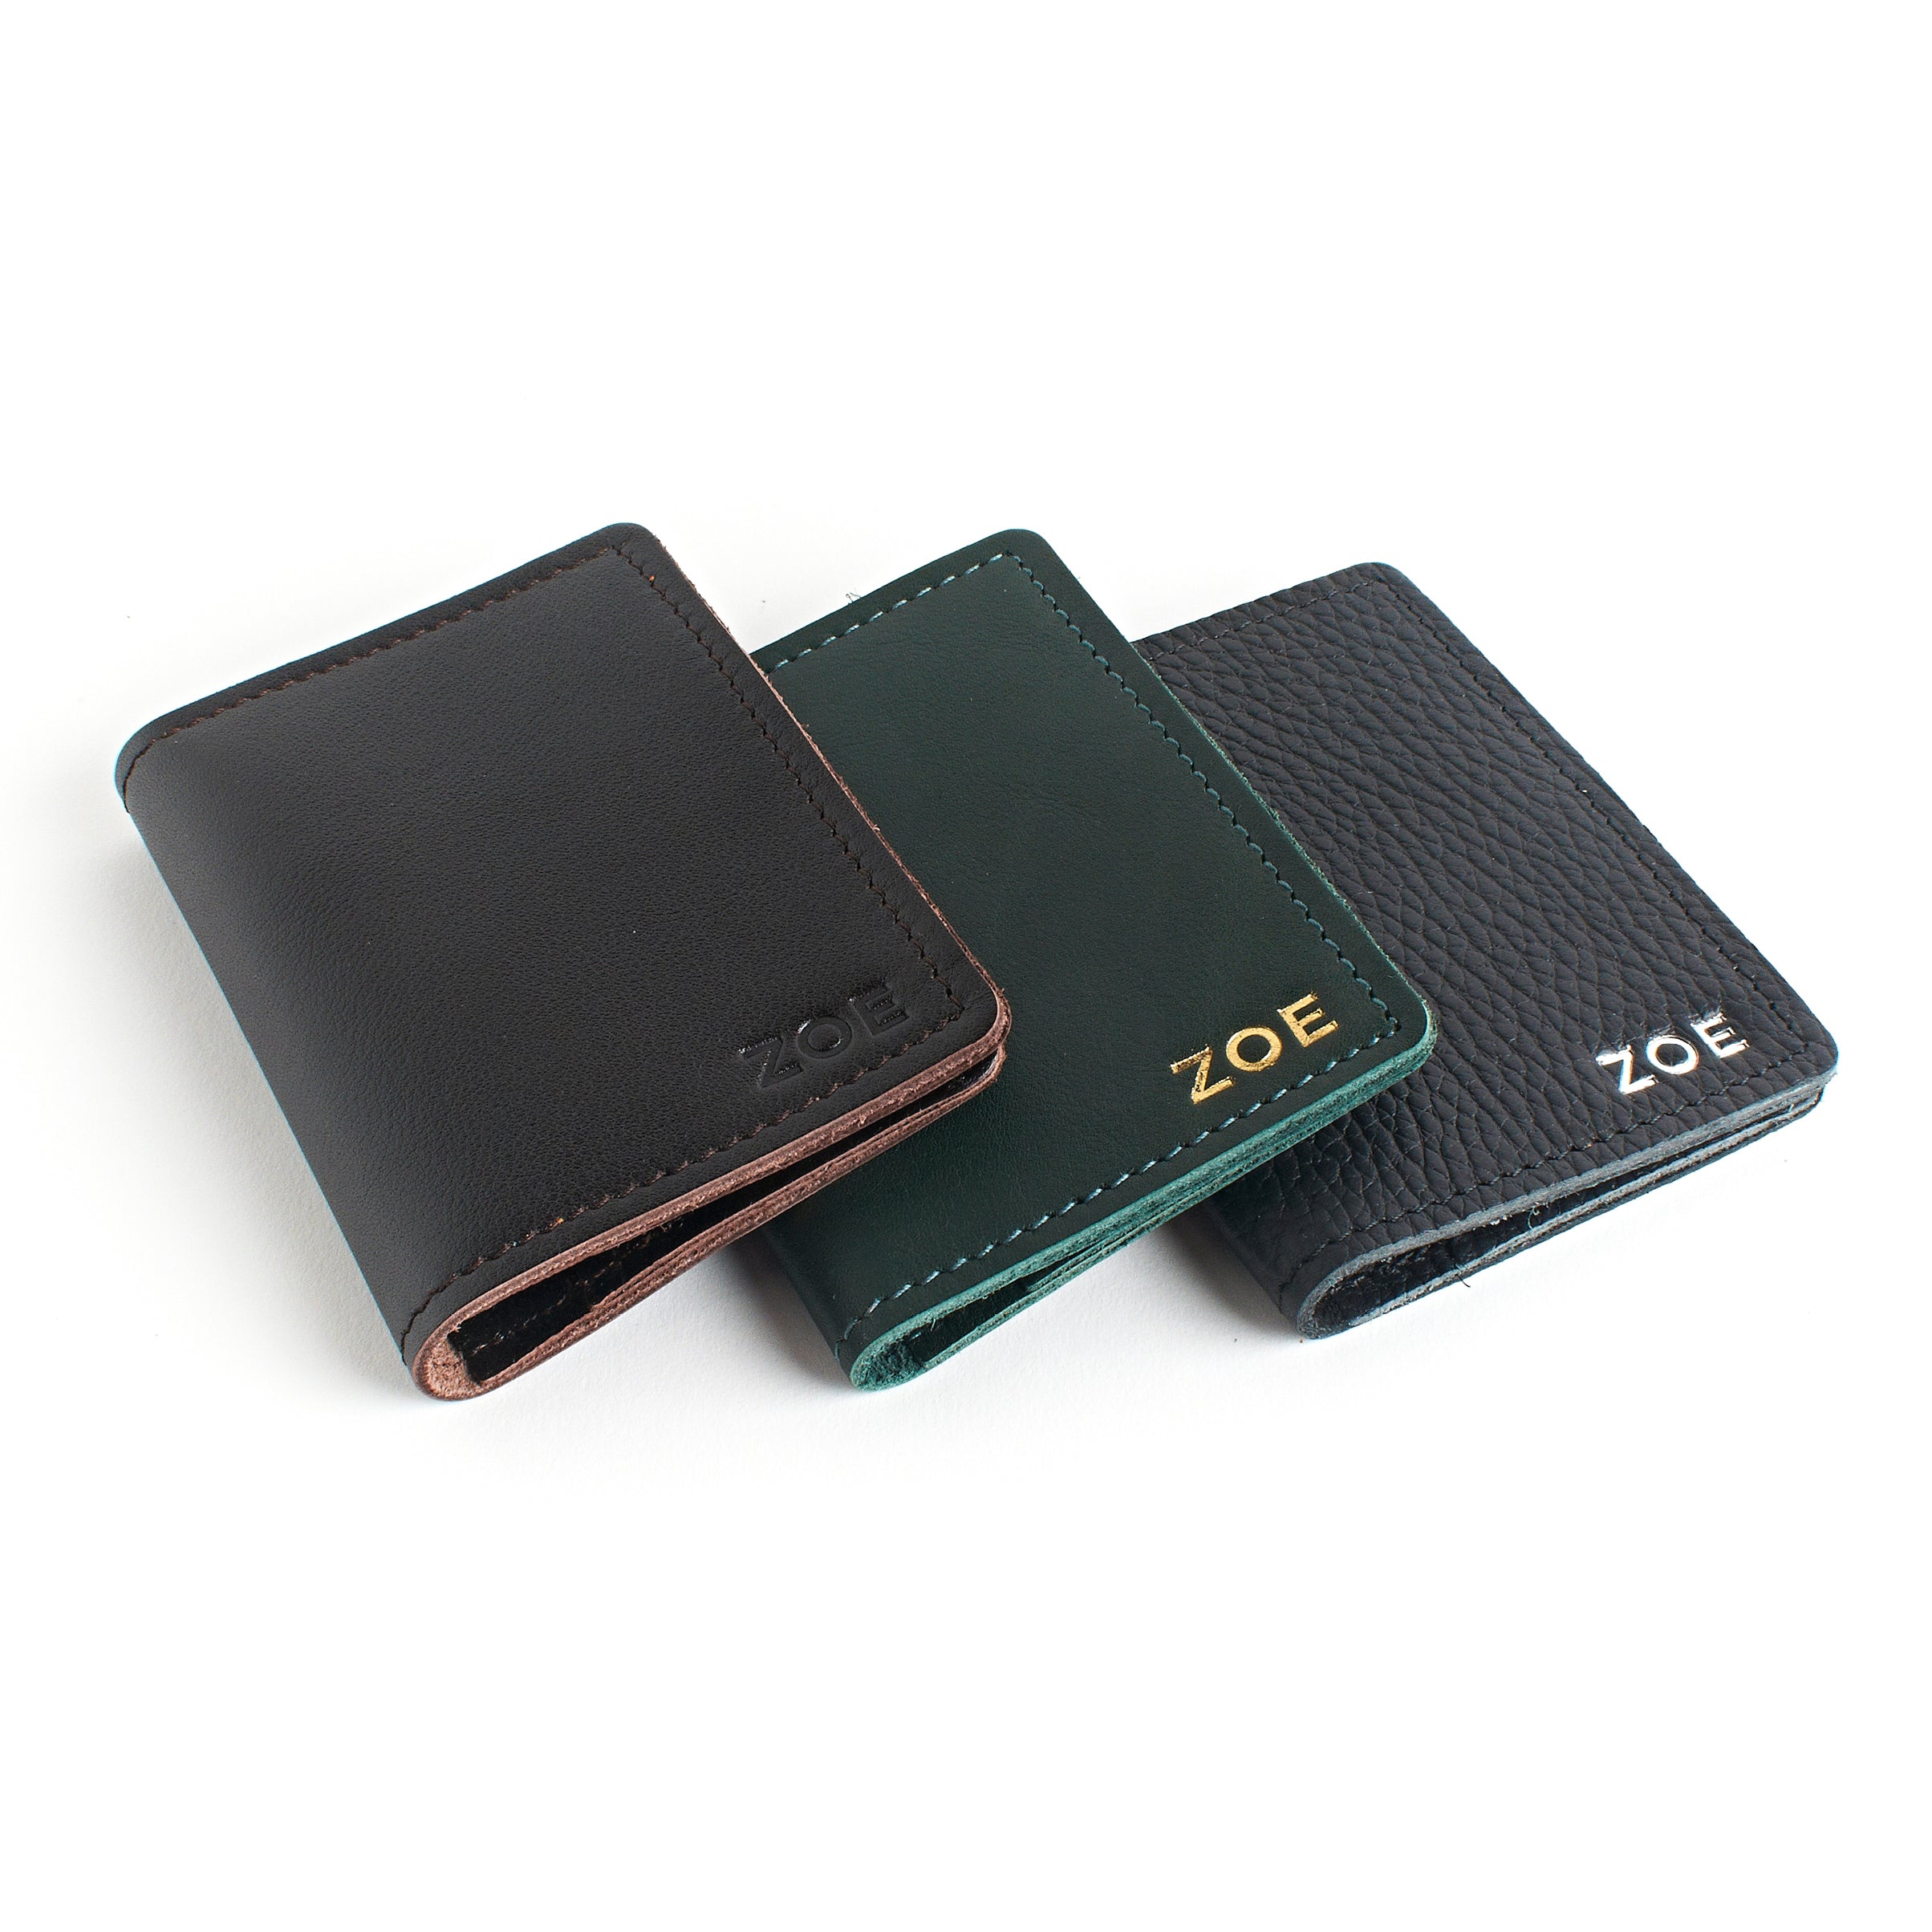 Three Leather Wallet 